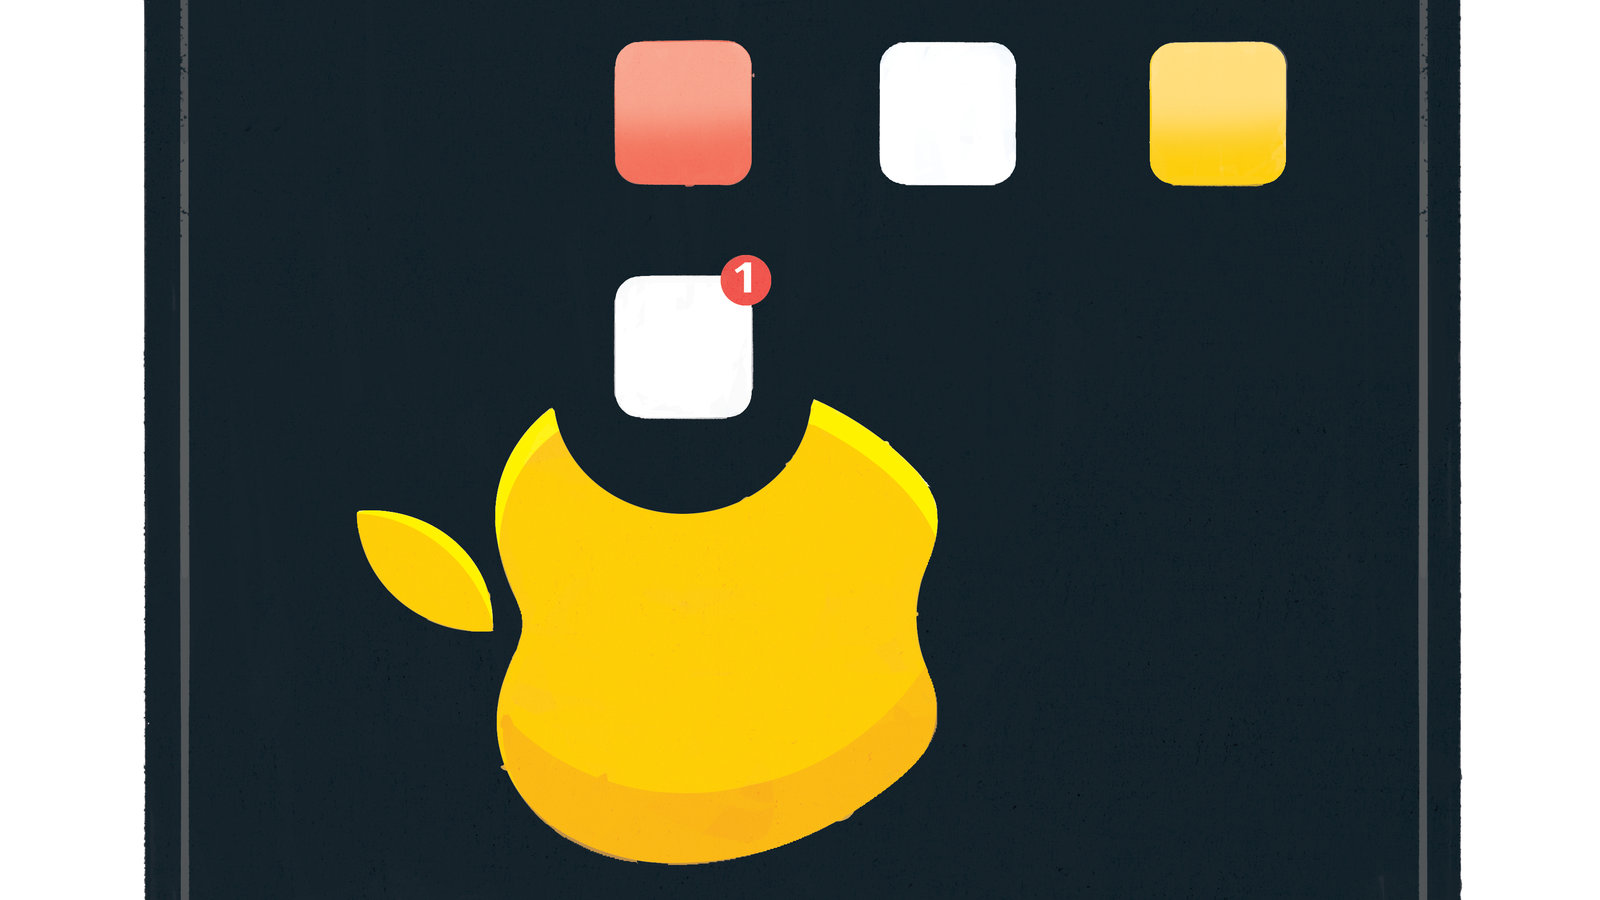 Apple logo eating app icons in the style of Pac-Man